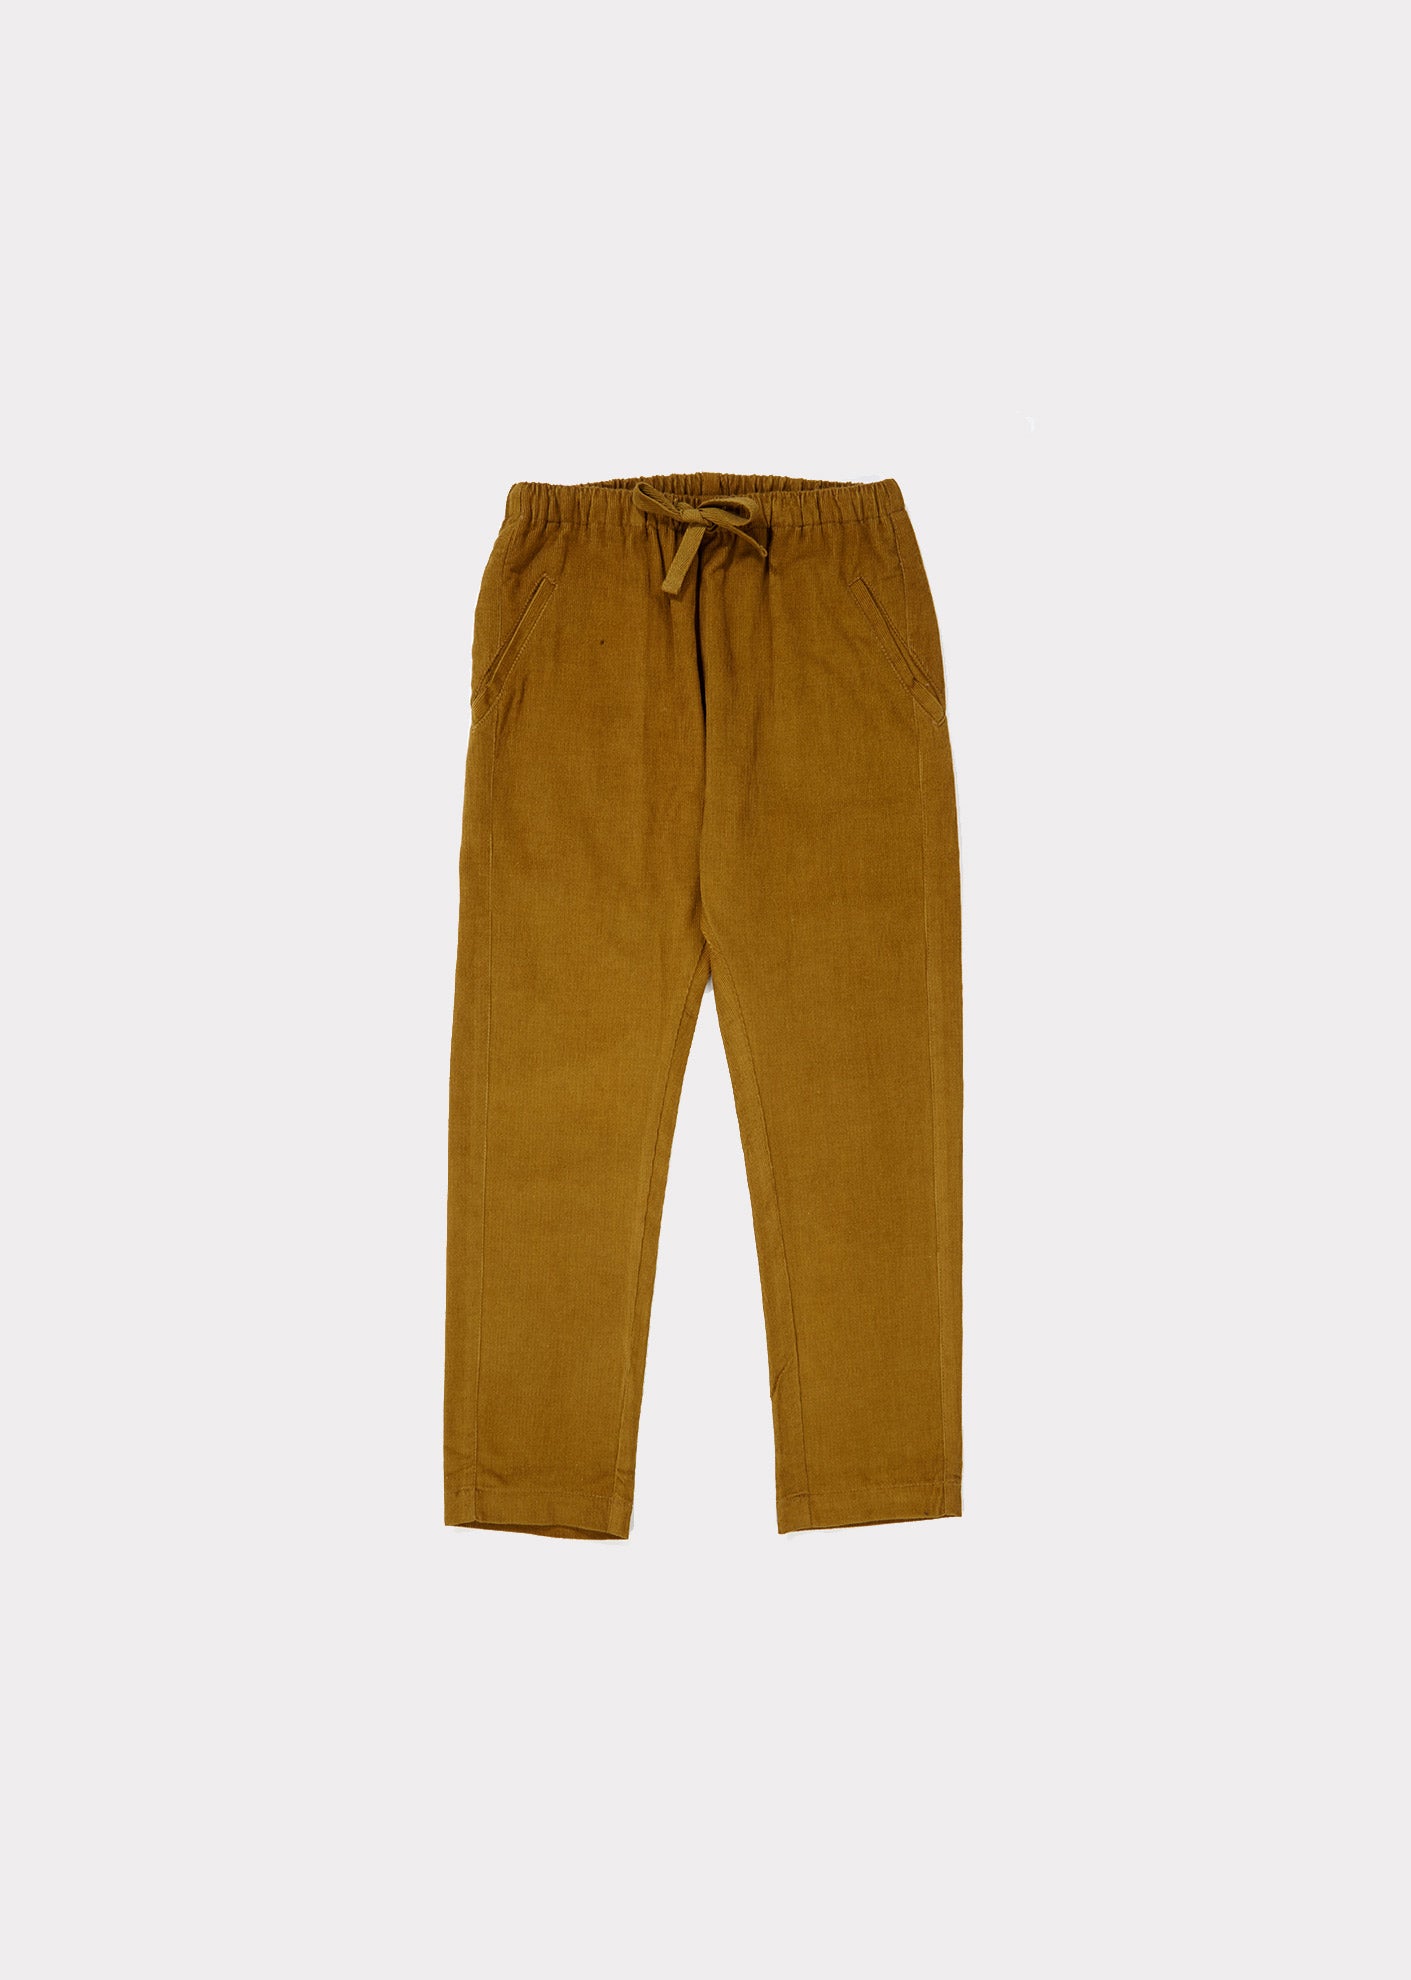 Girls Yellow Brown Cotton Trousers